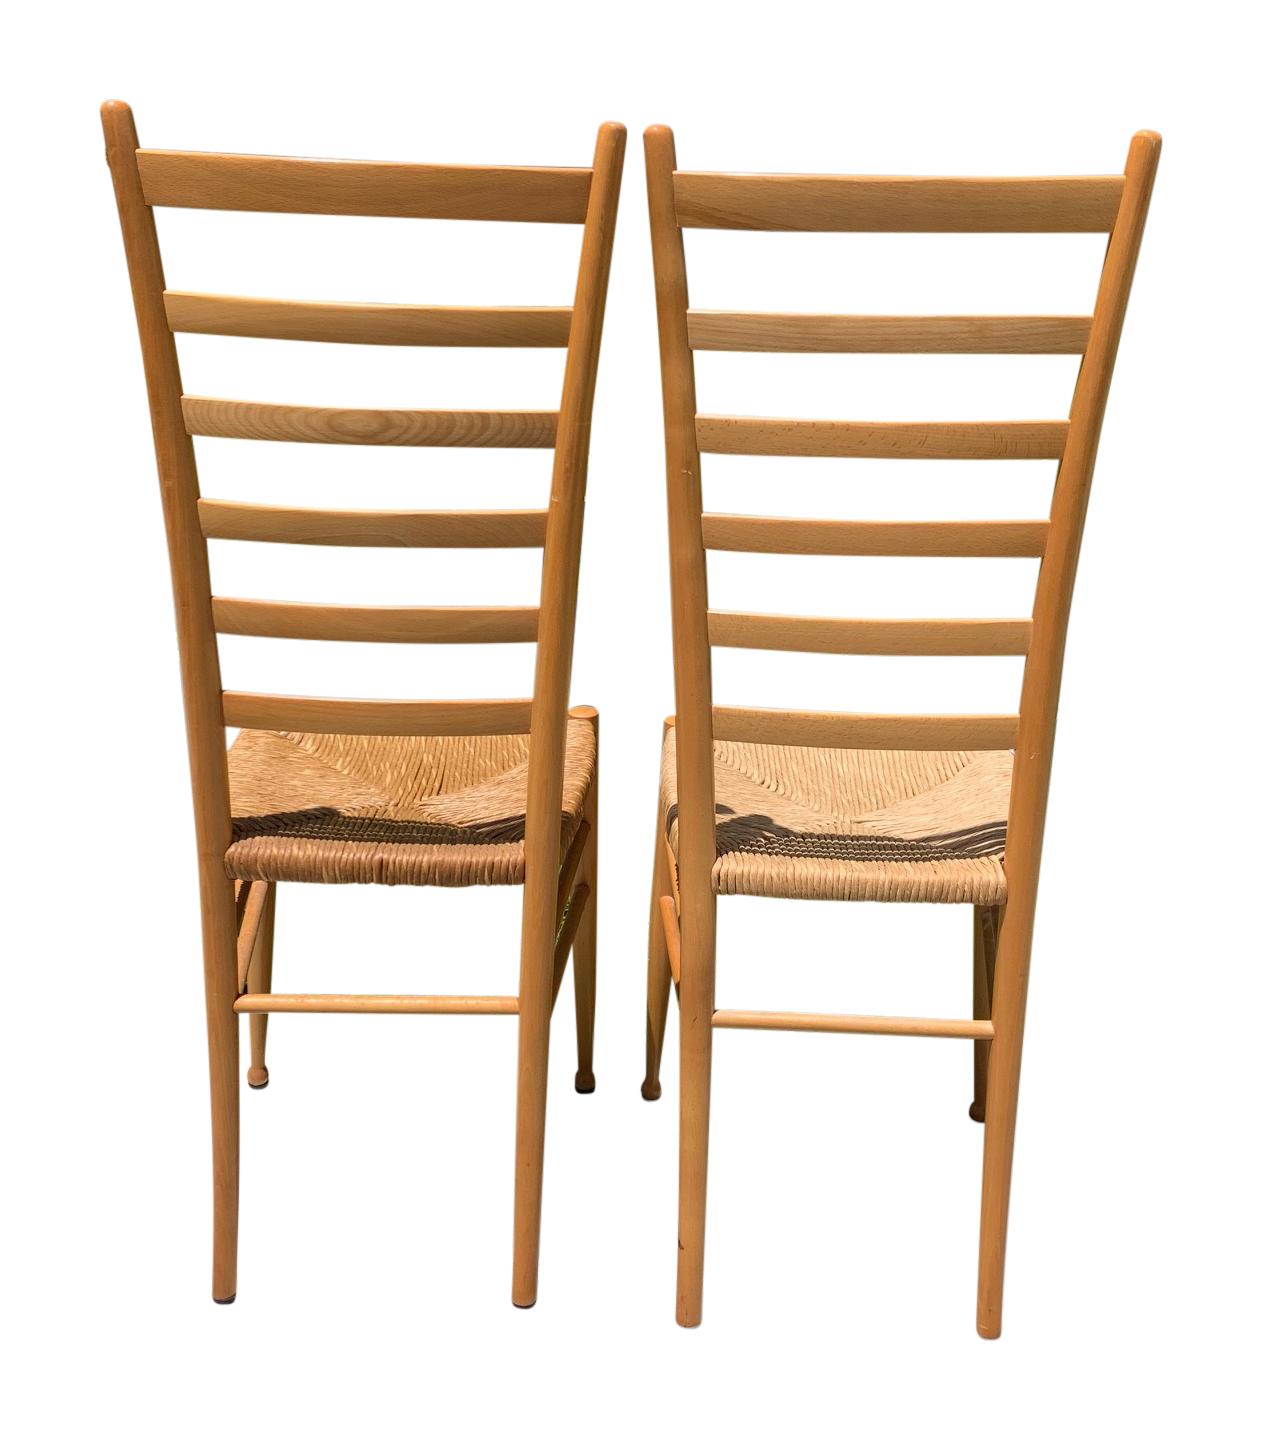 20th Century Pair of Wood Italian Ladder Back Chairs Attributed to Gio Ponti